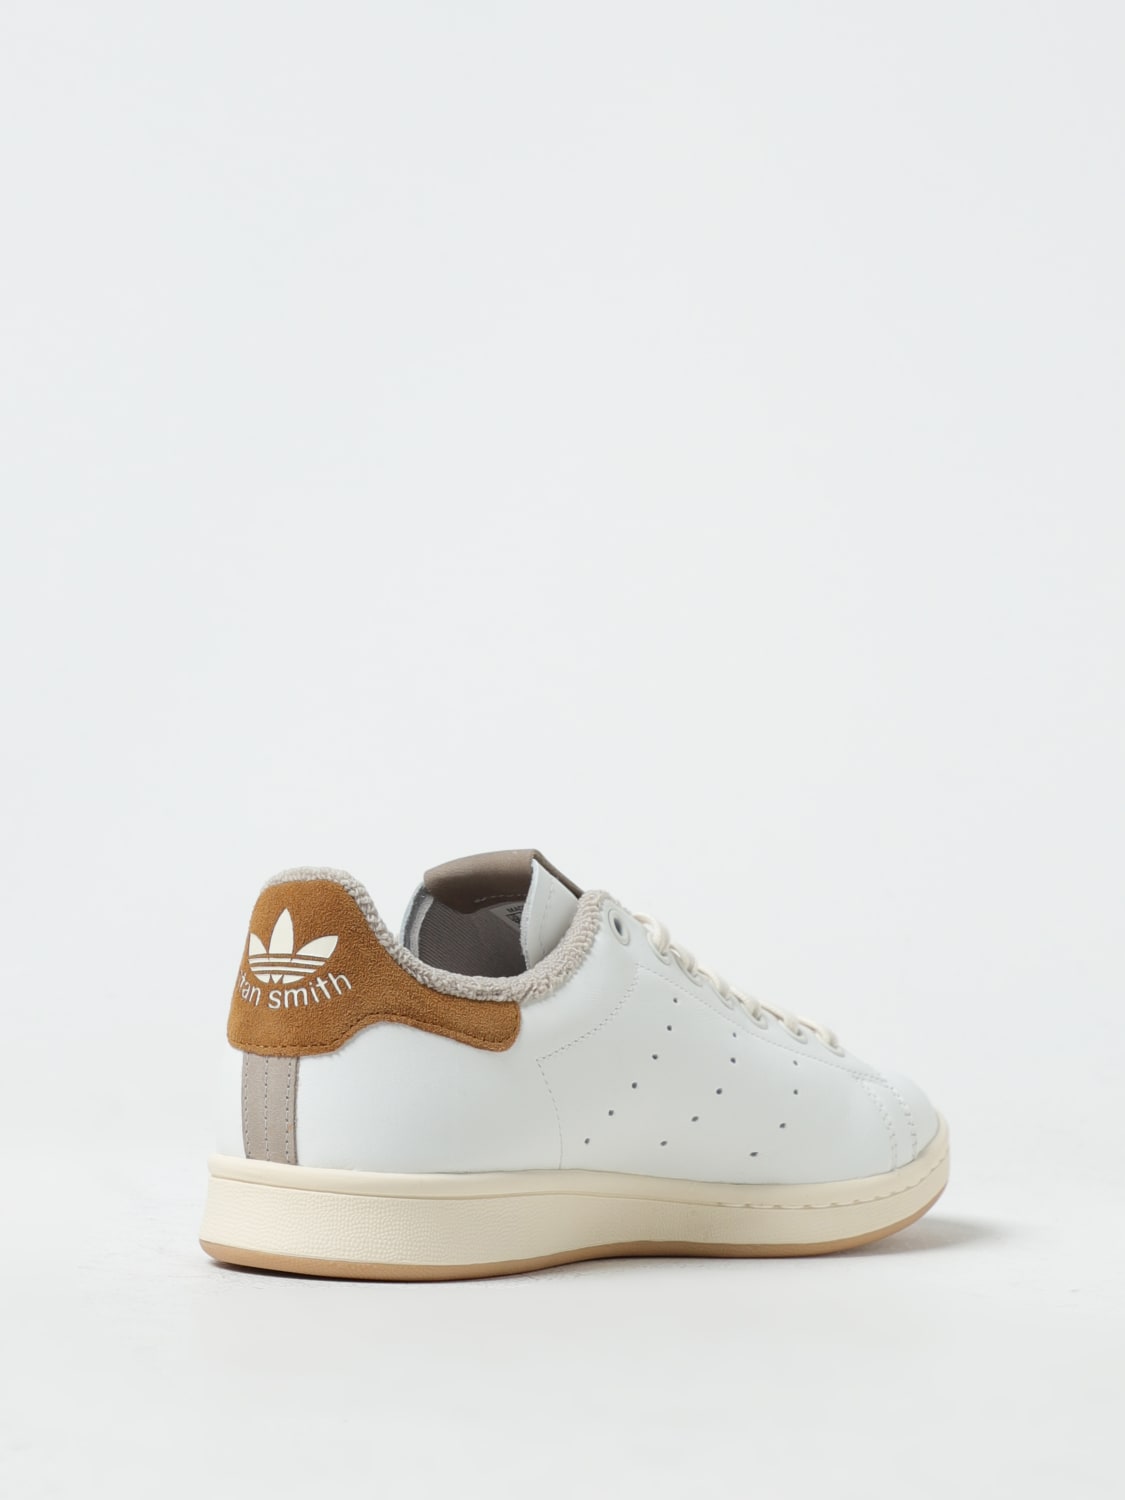 White Smith online ADIDAS leather at ORIGINALS: Adidas Originals - sneakers ID2031 in | sneakers Stan